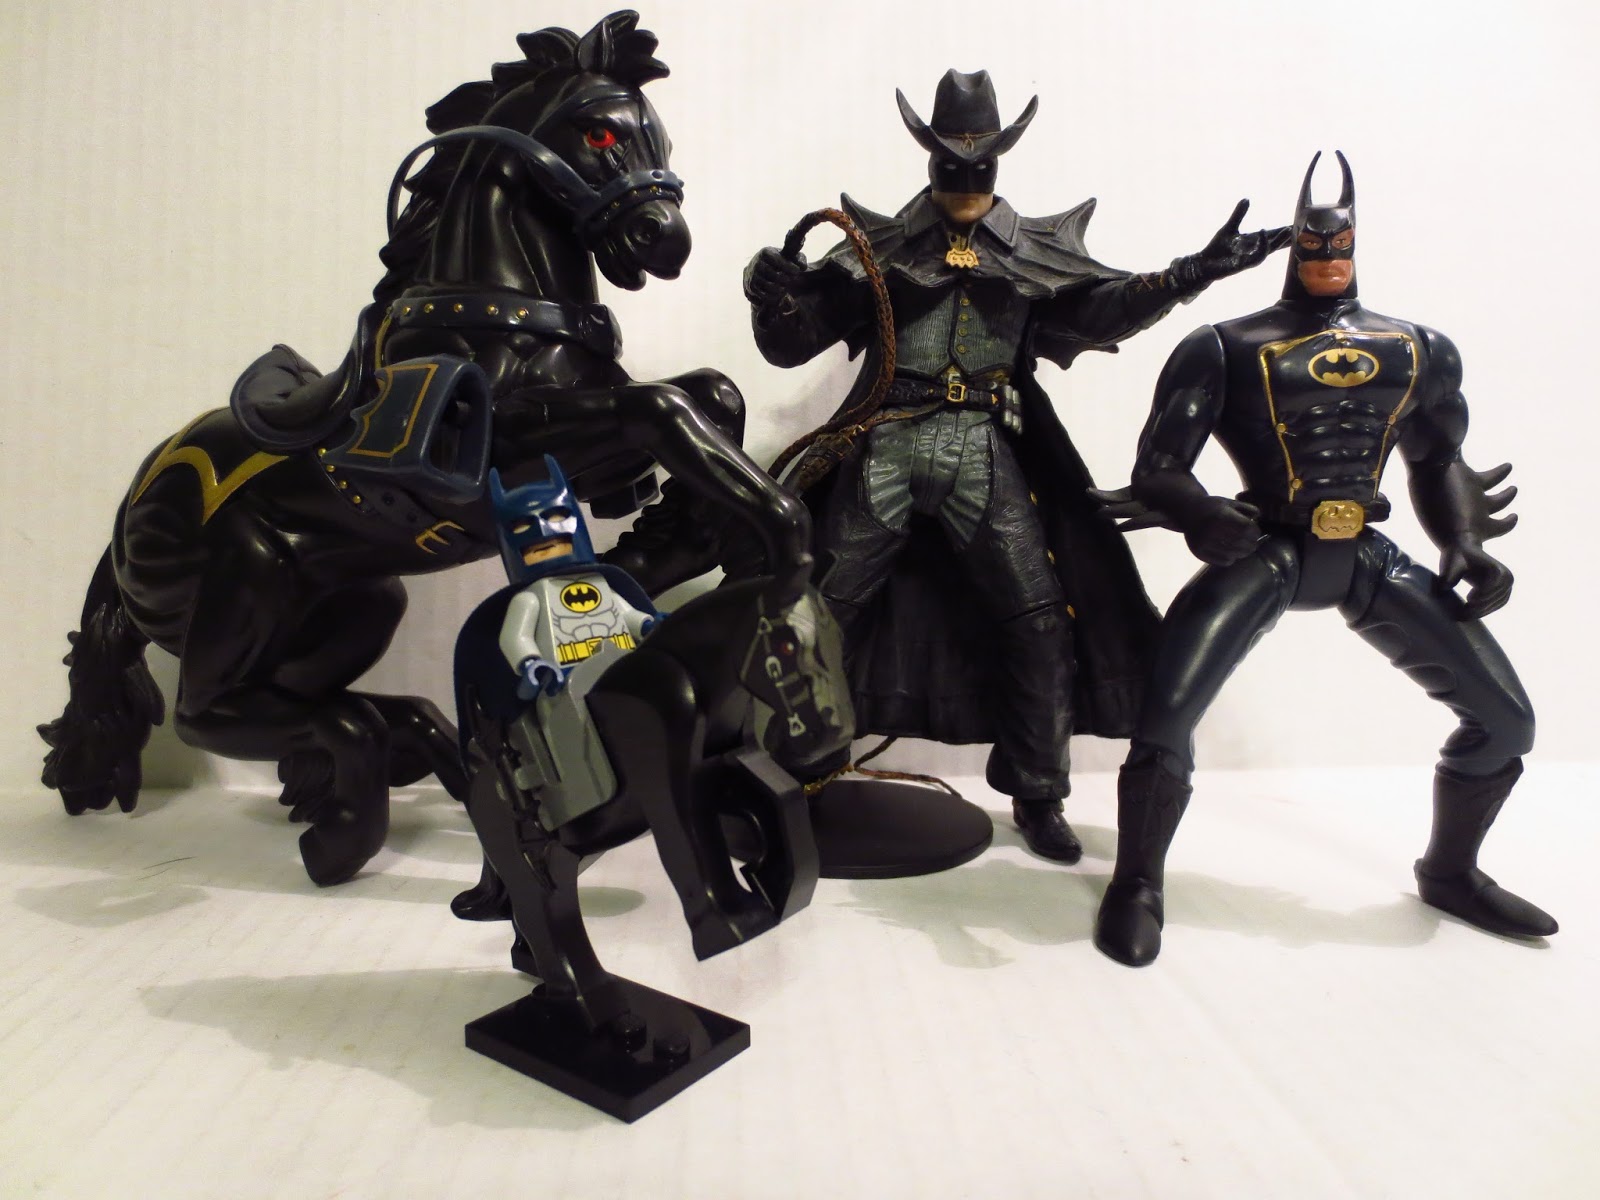 Action Figure Review 90s Edition: Dark Rider Batman from Legends of Batman  by Kenner (Confirmed: Epic)